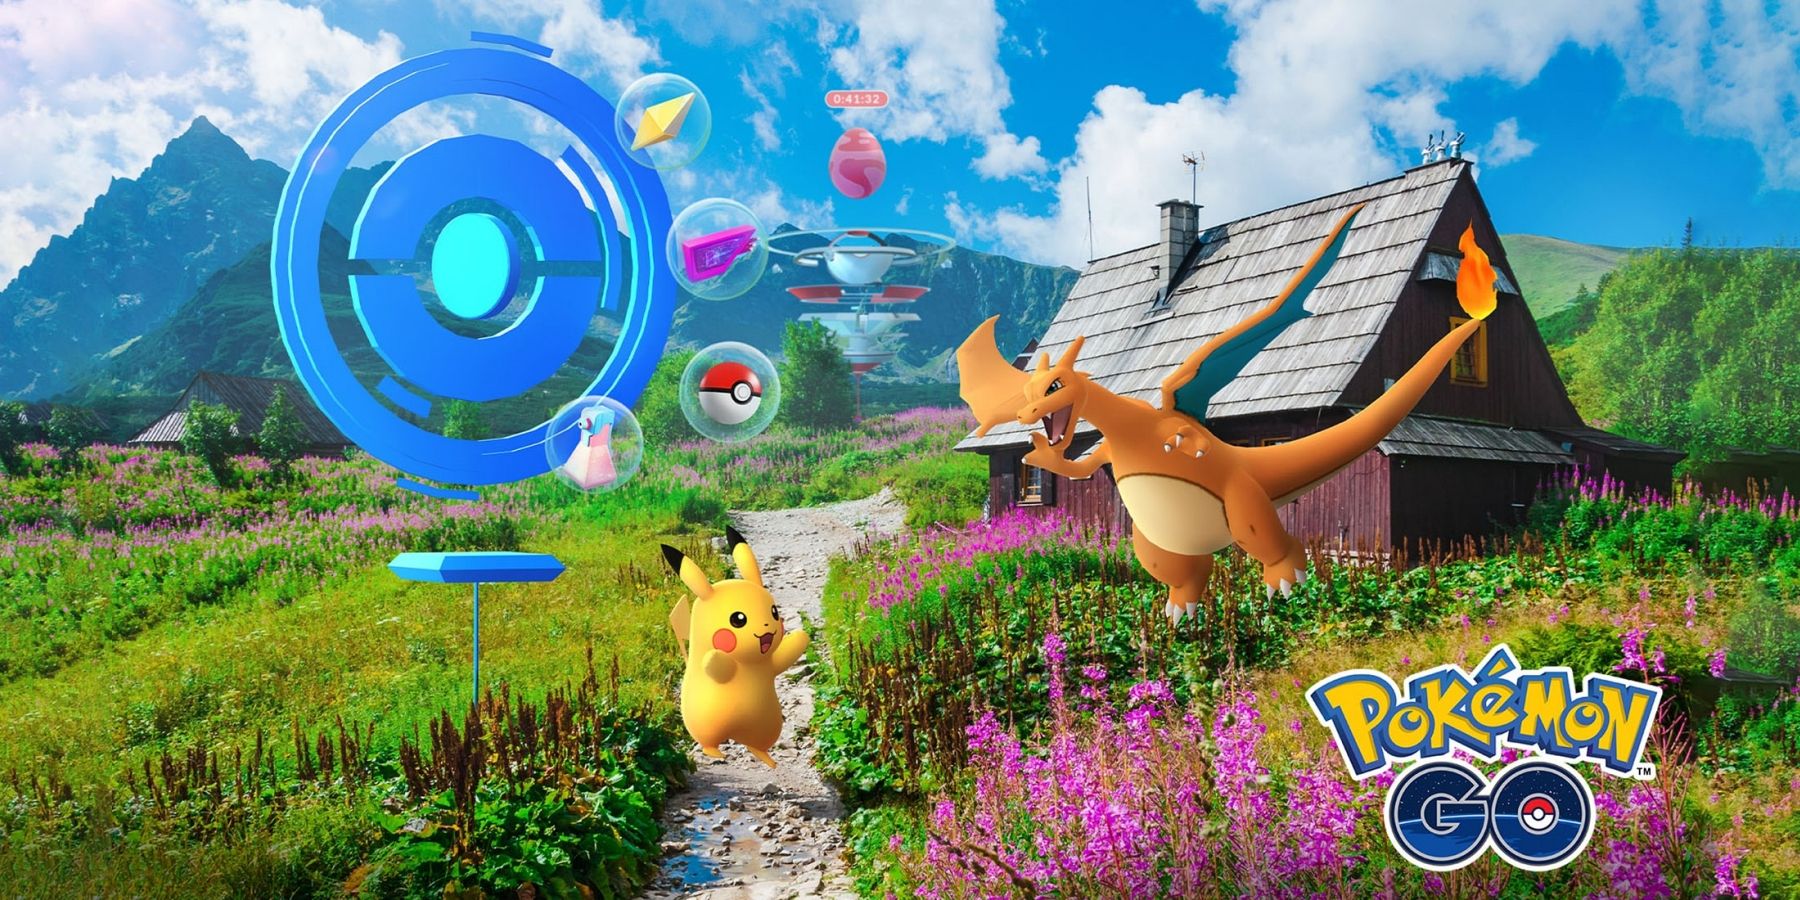 pokemon-go-releases-free-special-research-with-mythical-pokemon-encounter